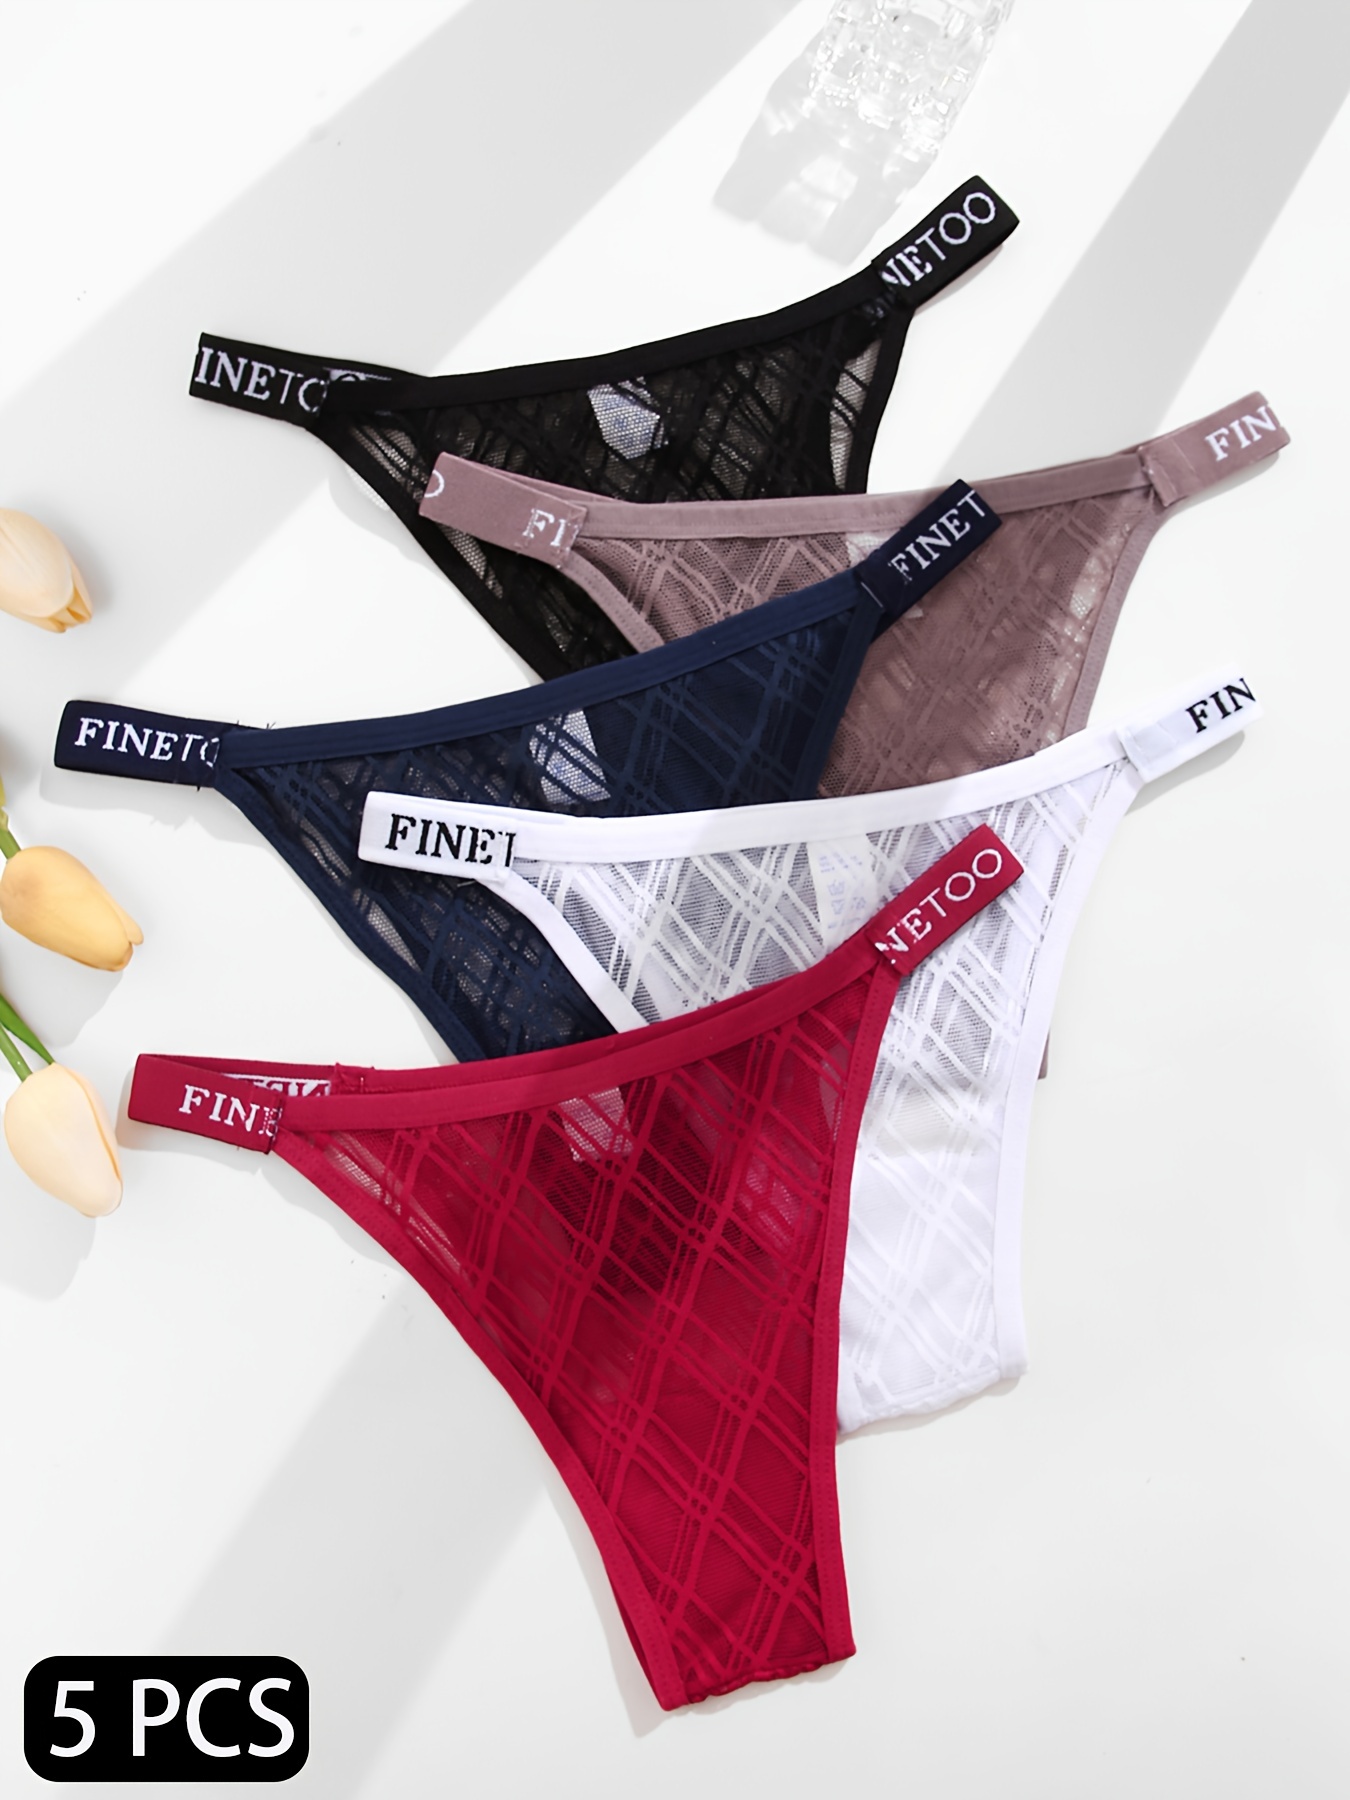  FINETOO Boyshorts Panties For Women Cotton Underwear For  Women Cheeky Comfortable Boxer Briefs For Ladies 5 Packs